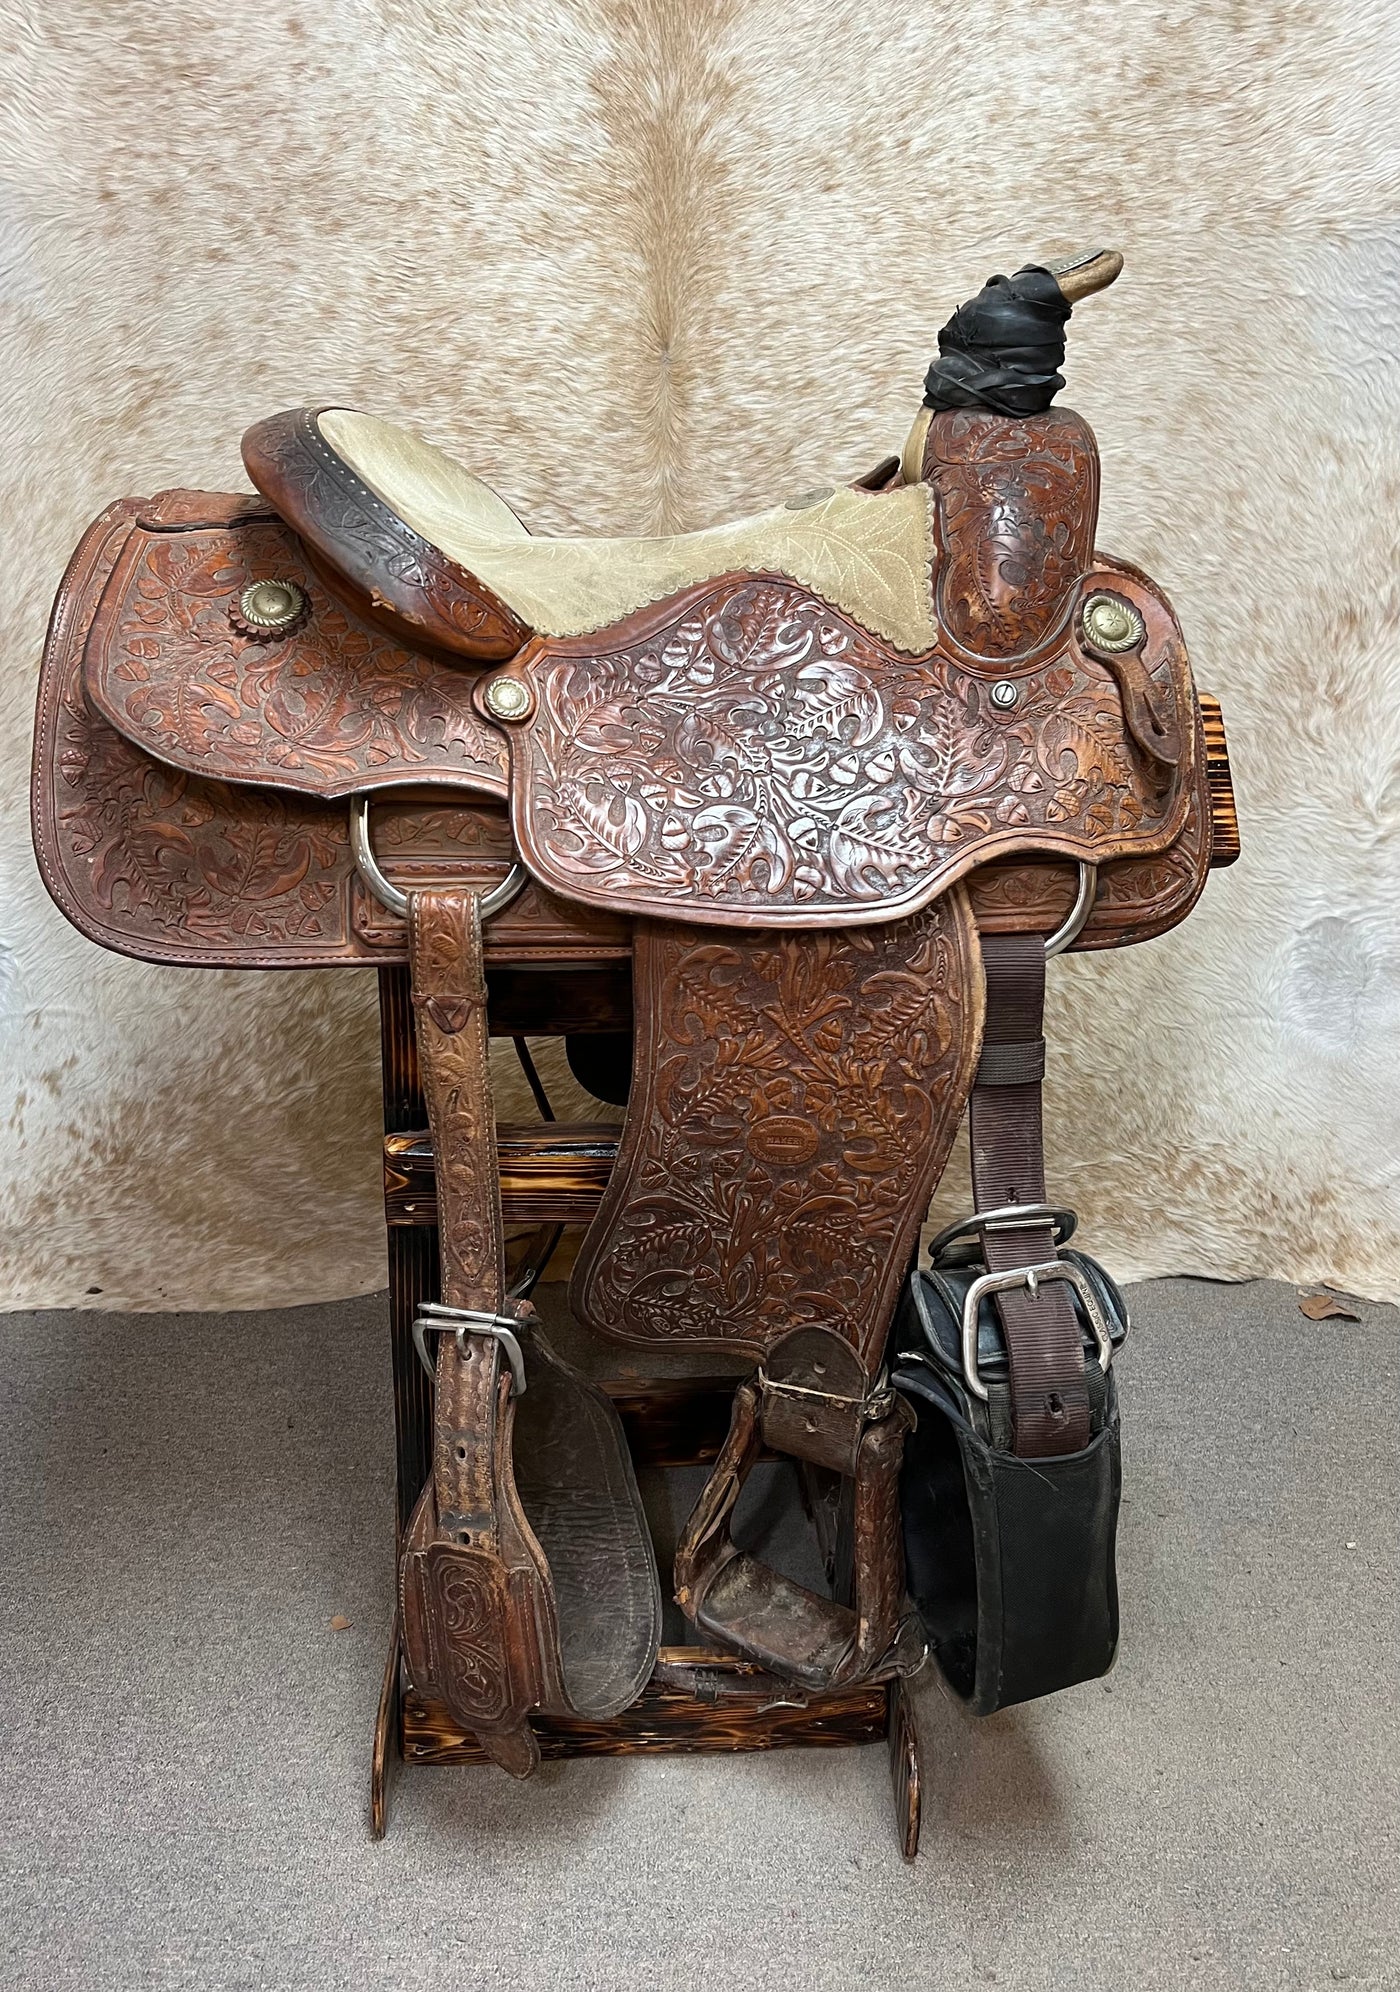 Used Billy Cook Roper, 15"